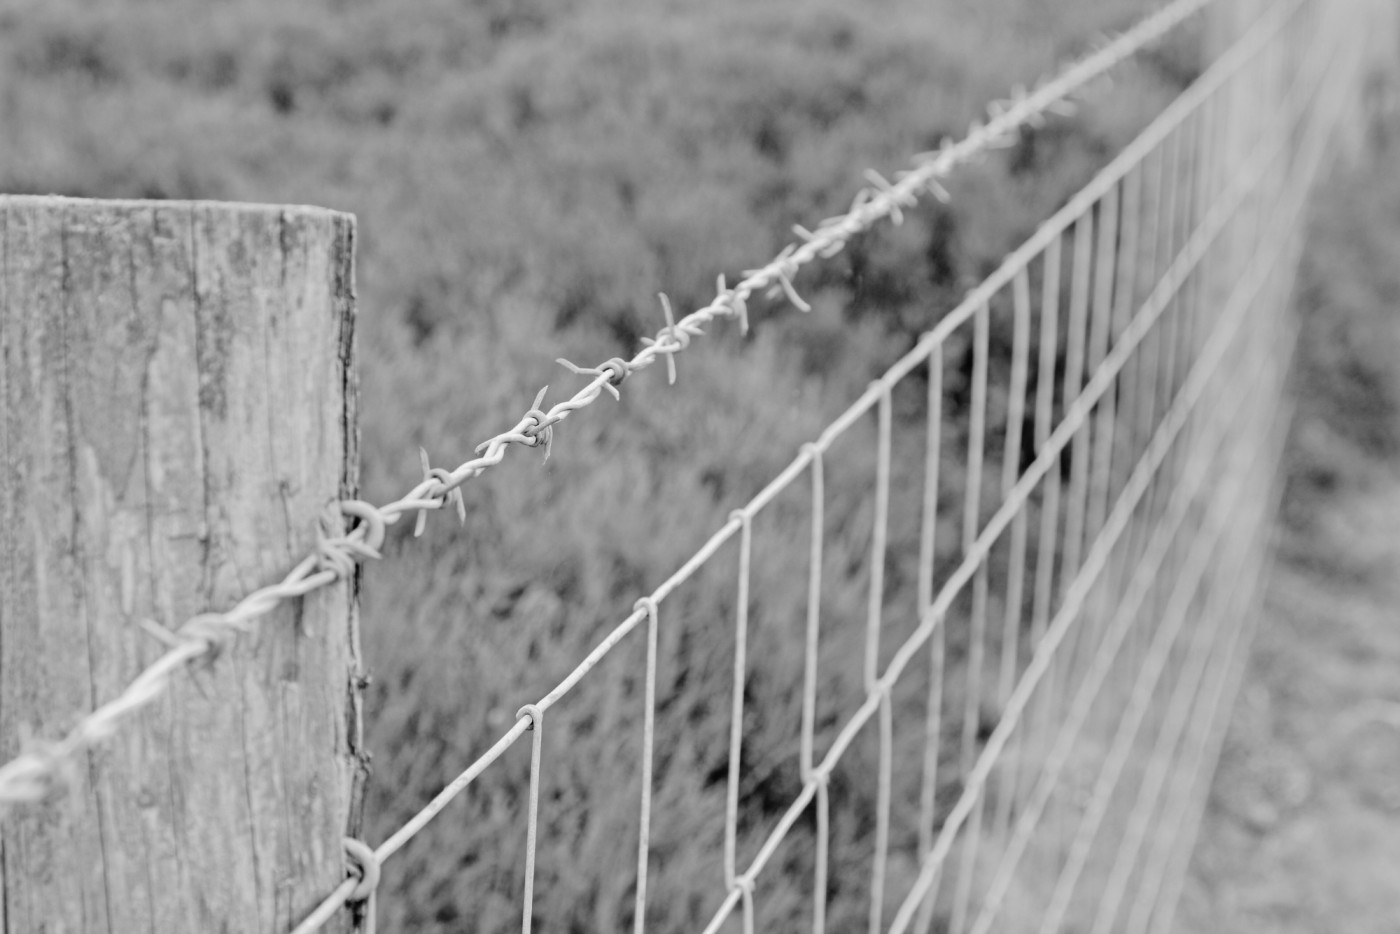 A new farm fence with barbed and netted wire